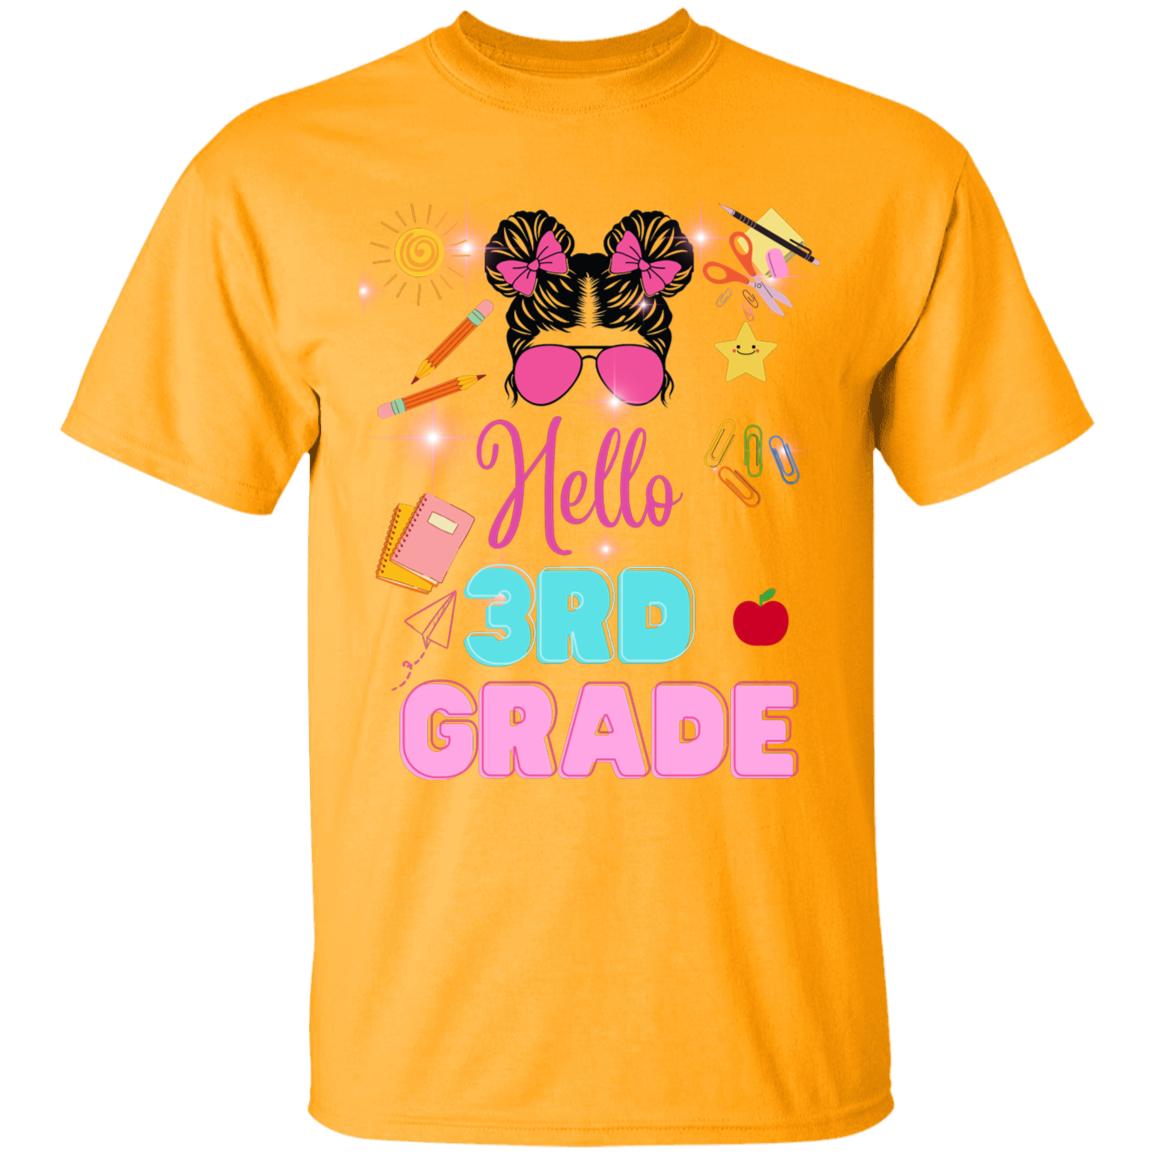 Girls youth Back-to-School T-Shirt Sale: Trendy T-Shirt. Funny back-to-school t-shirts